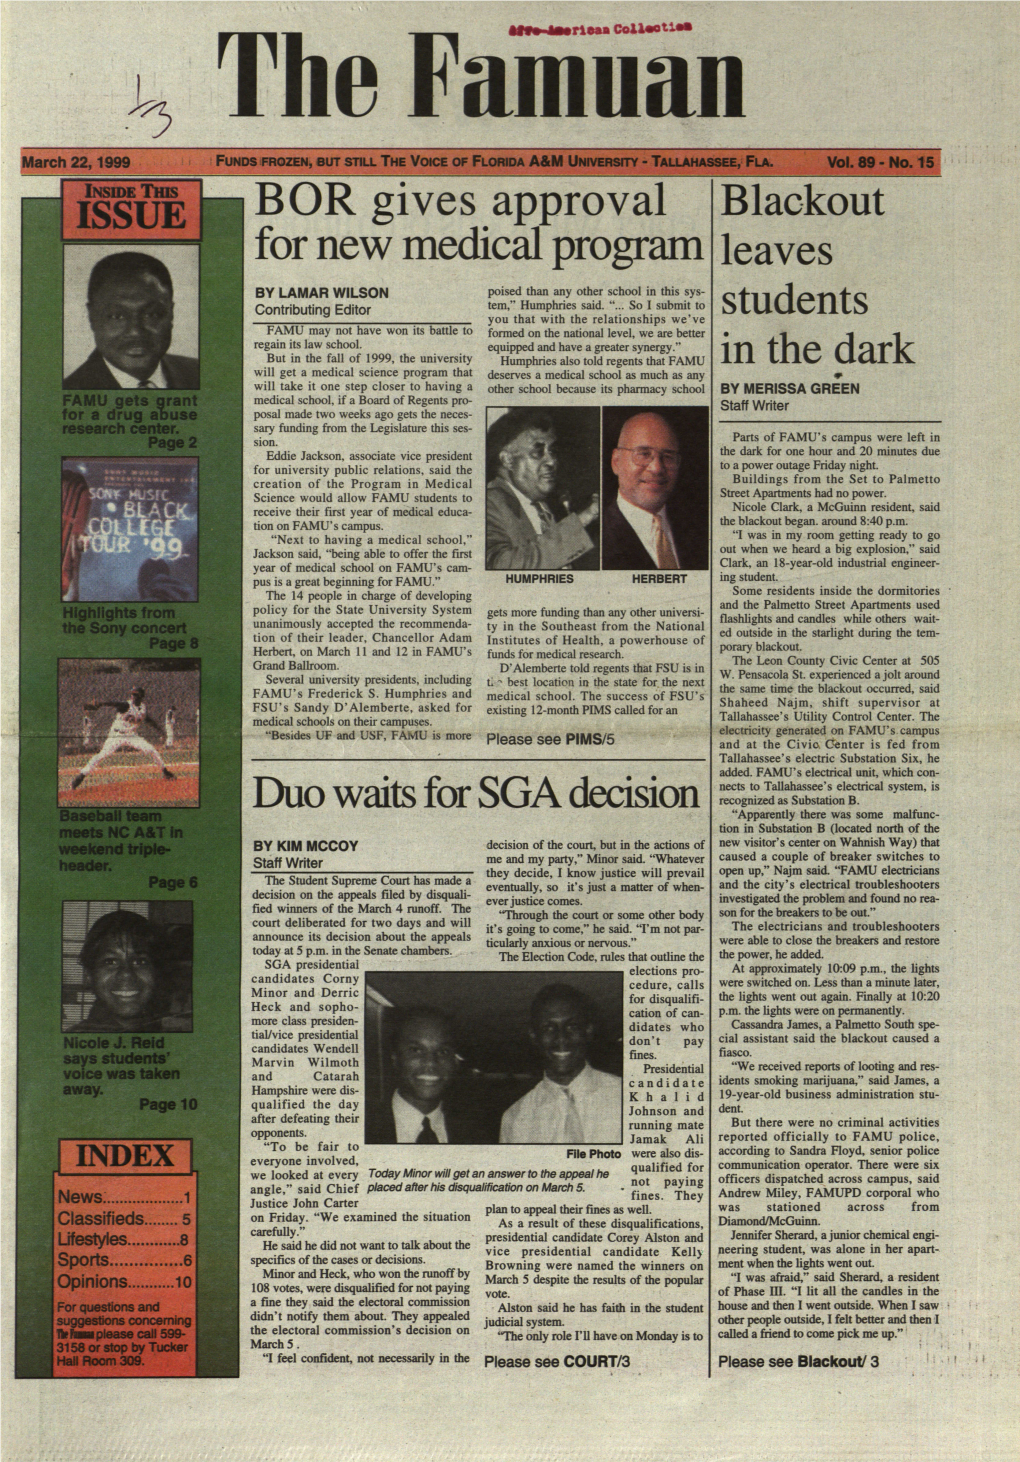 March 22, 1999 FUNDS FROZEN, but STILL the VOICE of FLORIDA A&M UNIVERSITY - TALLAHASSEE, FLA